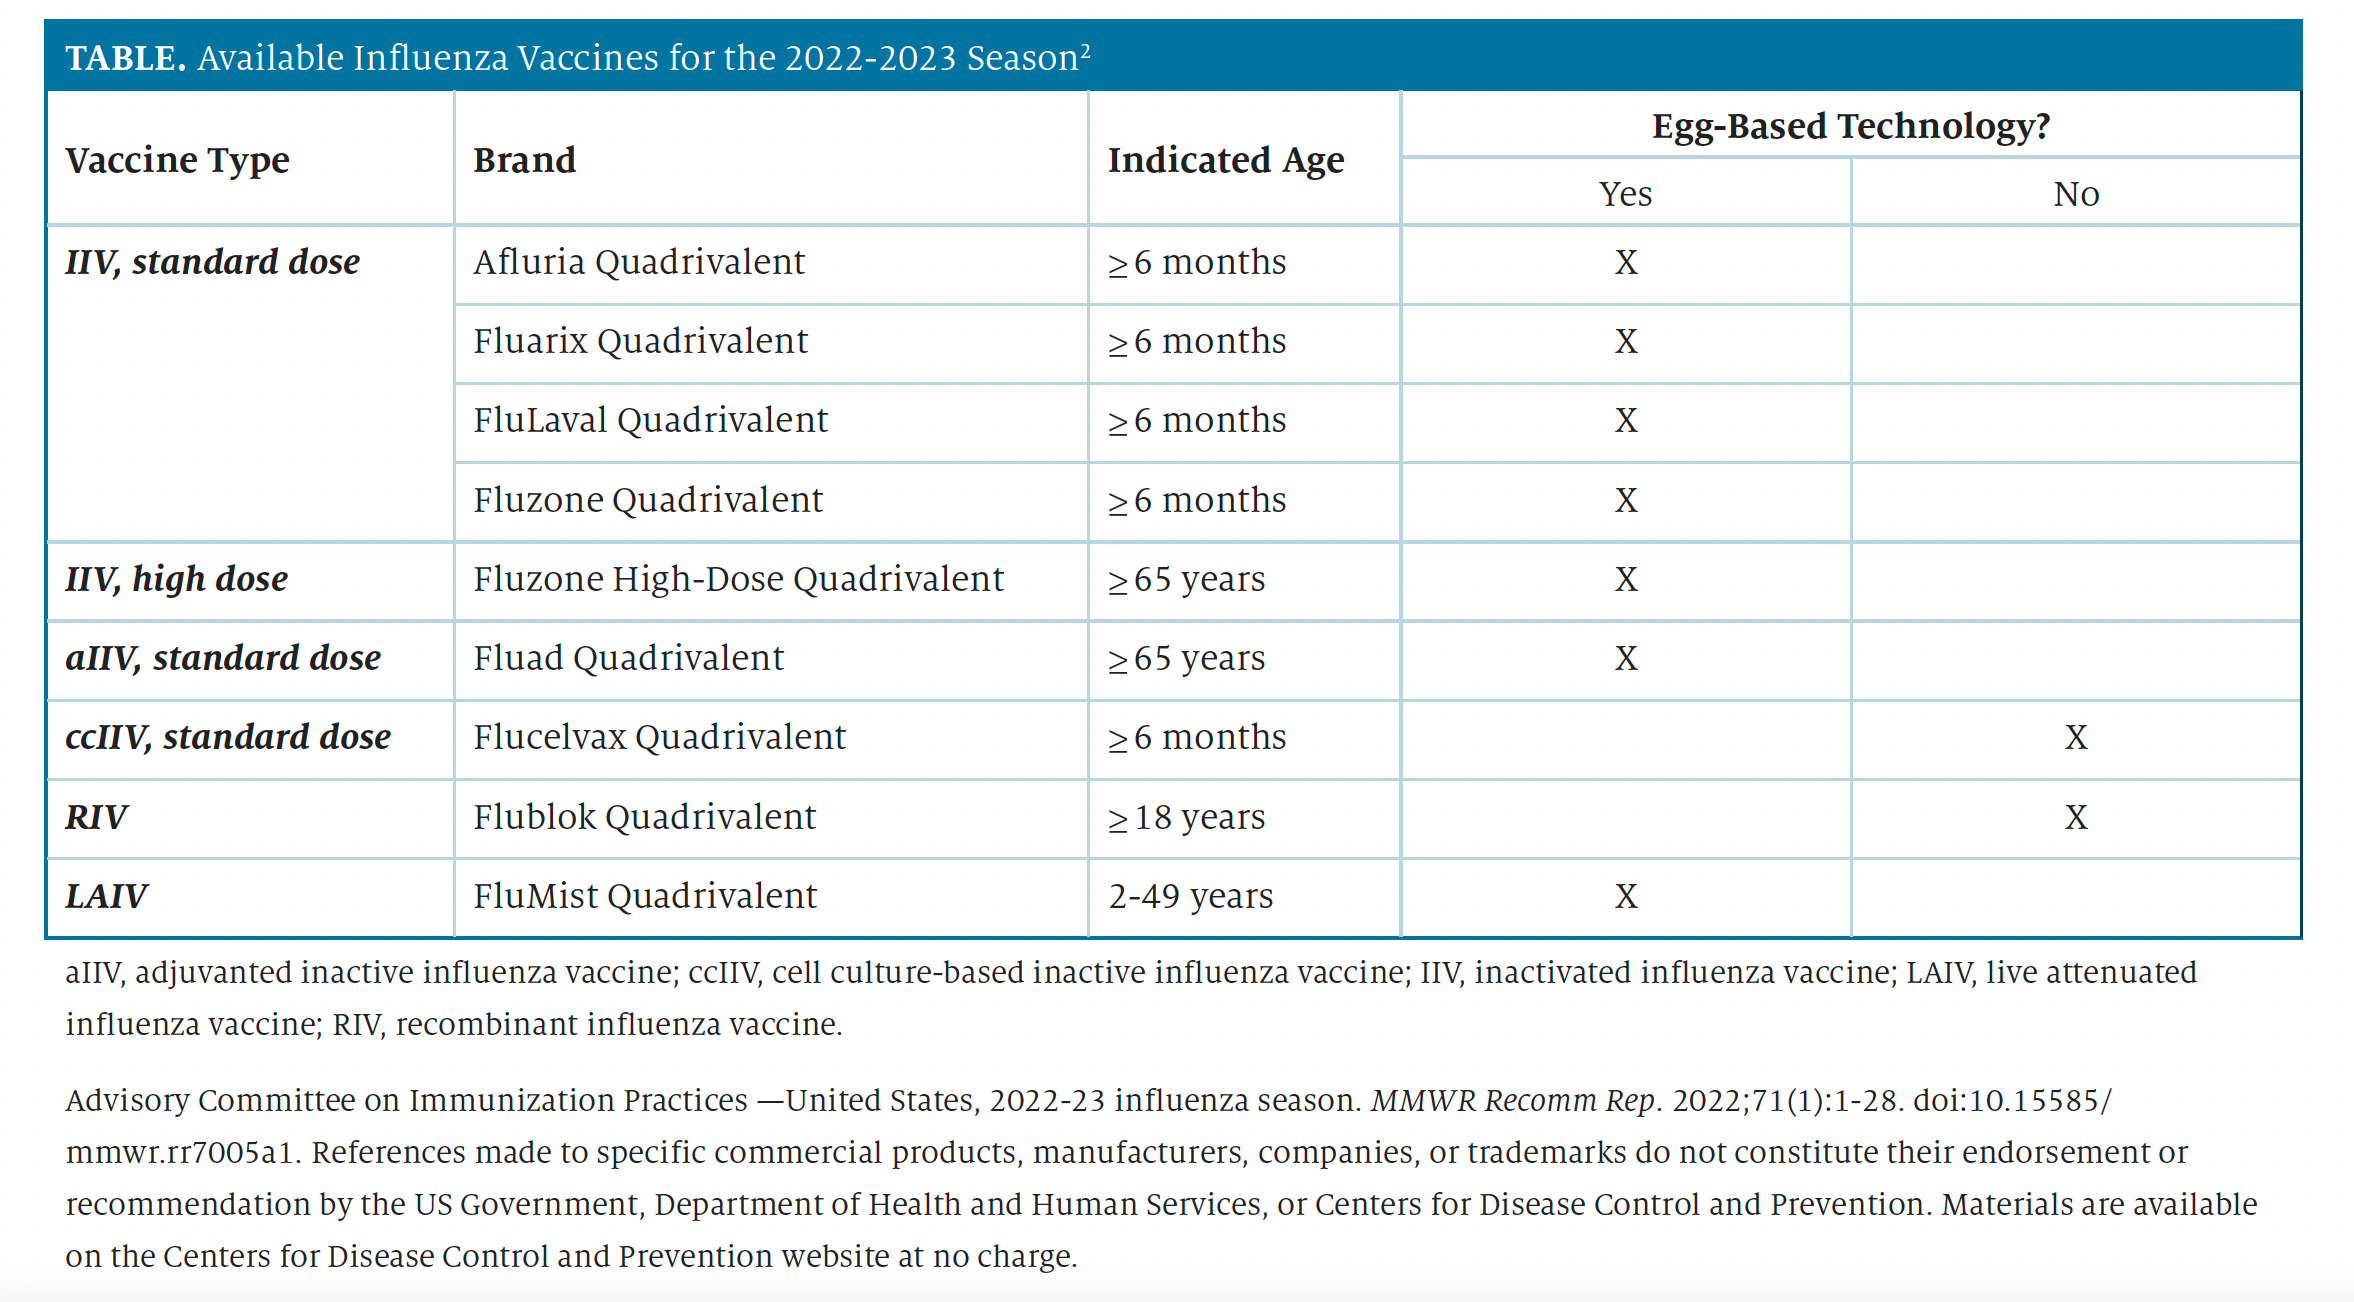 Available Influenza Vaccines for the 2022-2023 Season